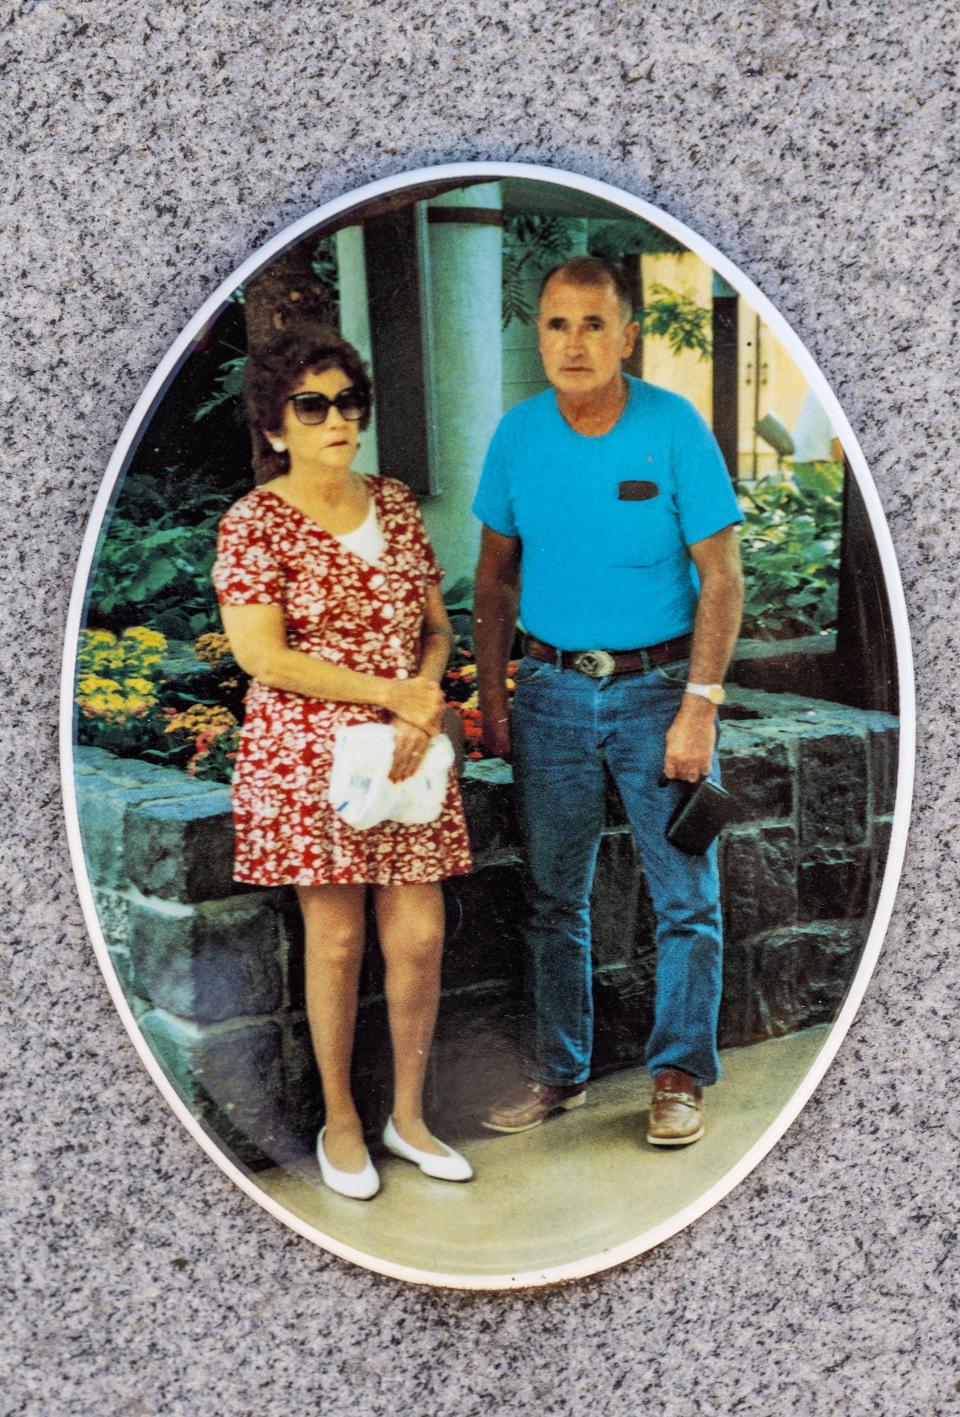 Donald Dean Studey with wife Anna on her grave stone near Thurman. According to his daughter, the late Studey murdered "five or six" women a year and buried them in and around an abandoned well on his property.